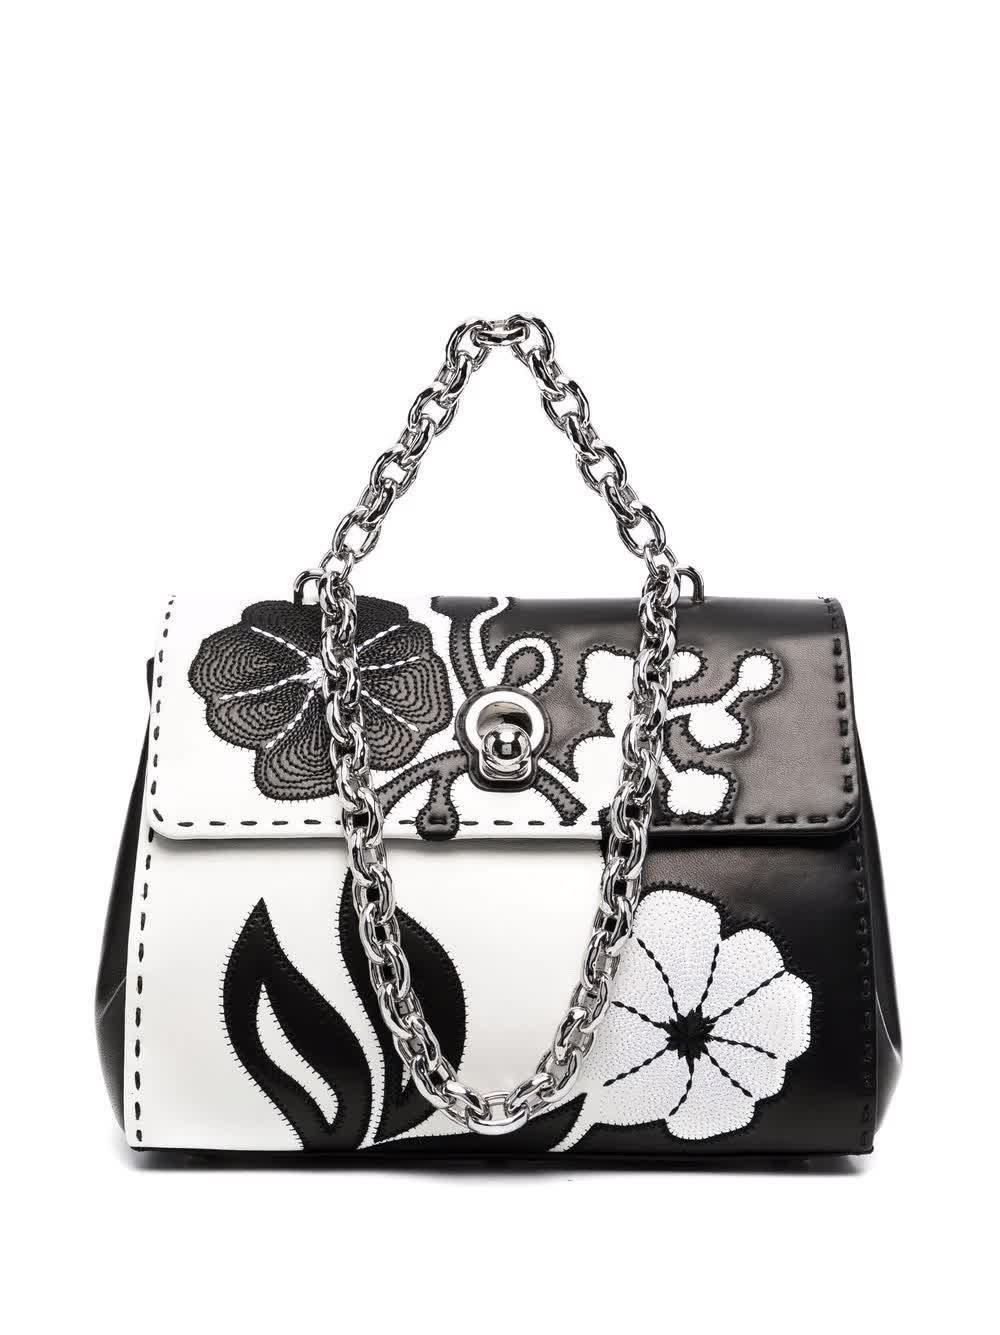 Ermanno Scervino Faubourg With Embroidered Floral Inlays